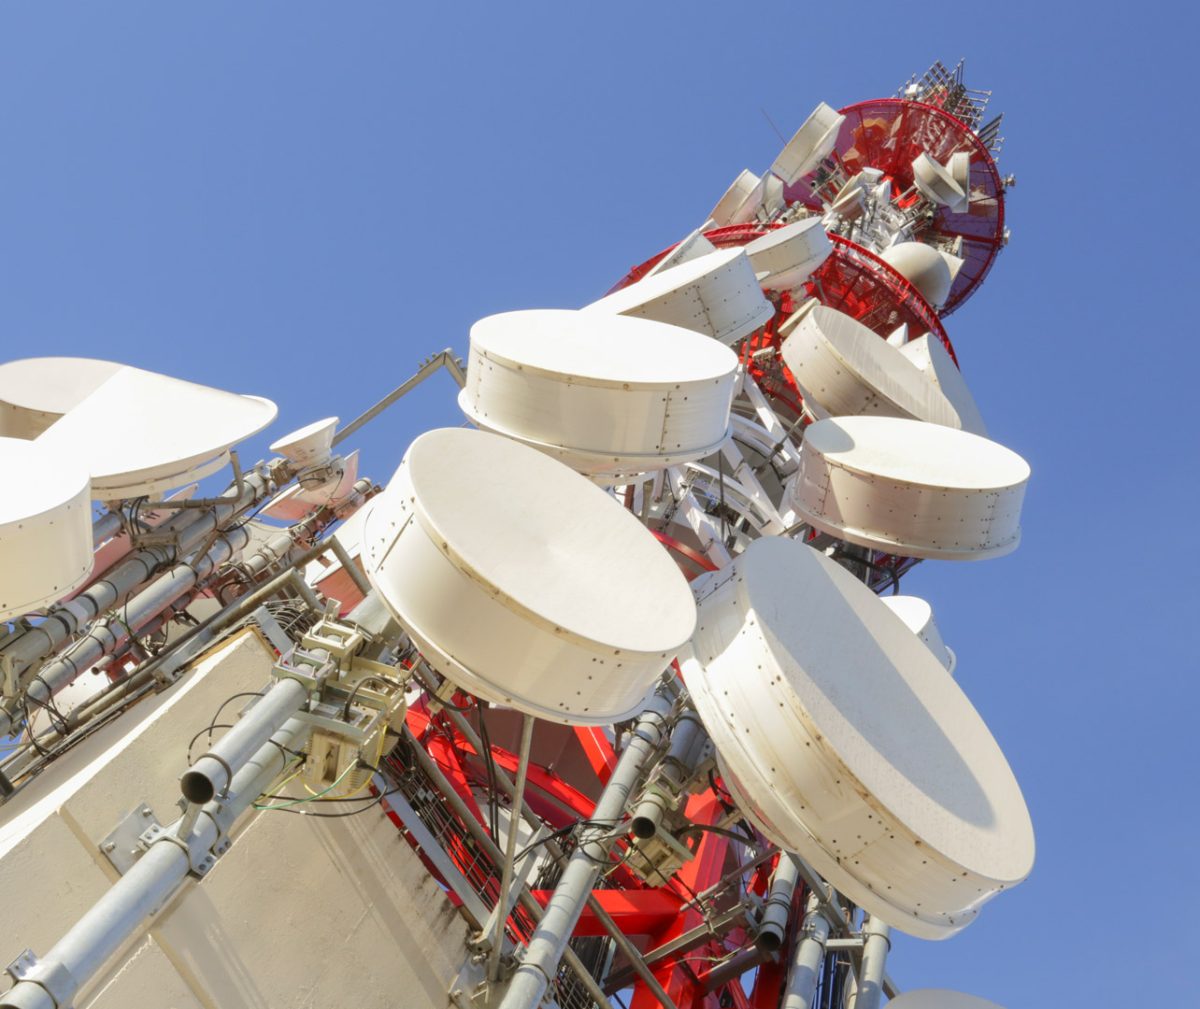 A close-up view of a telecommunications tower, emphasising its various large, round antenna dishes. The tower structure is painted red and white, and the image is taken from a low angle looking up, highlighting the height and complexity of the tower.